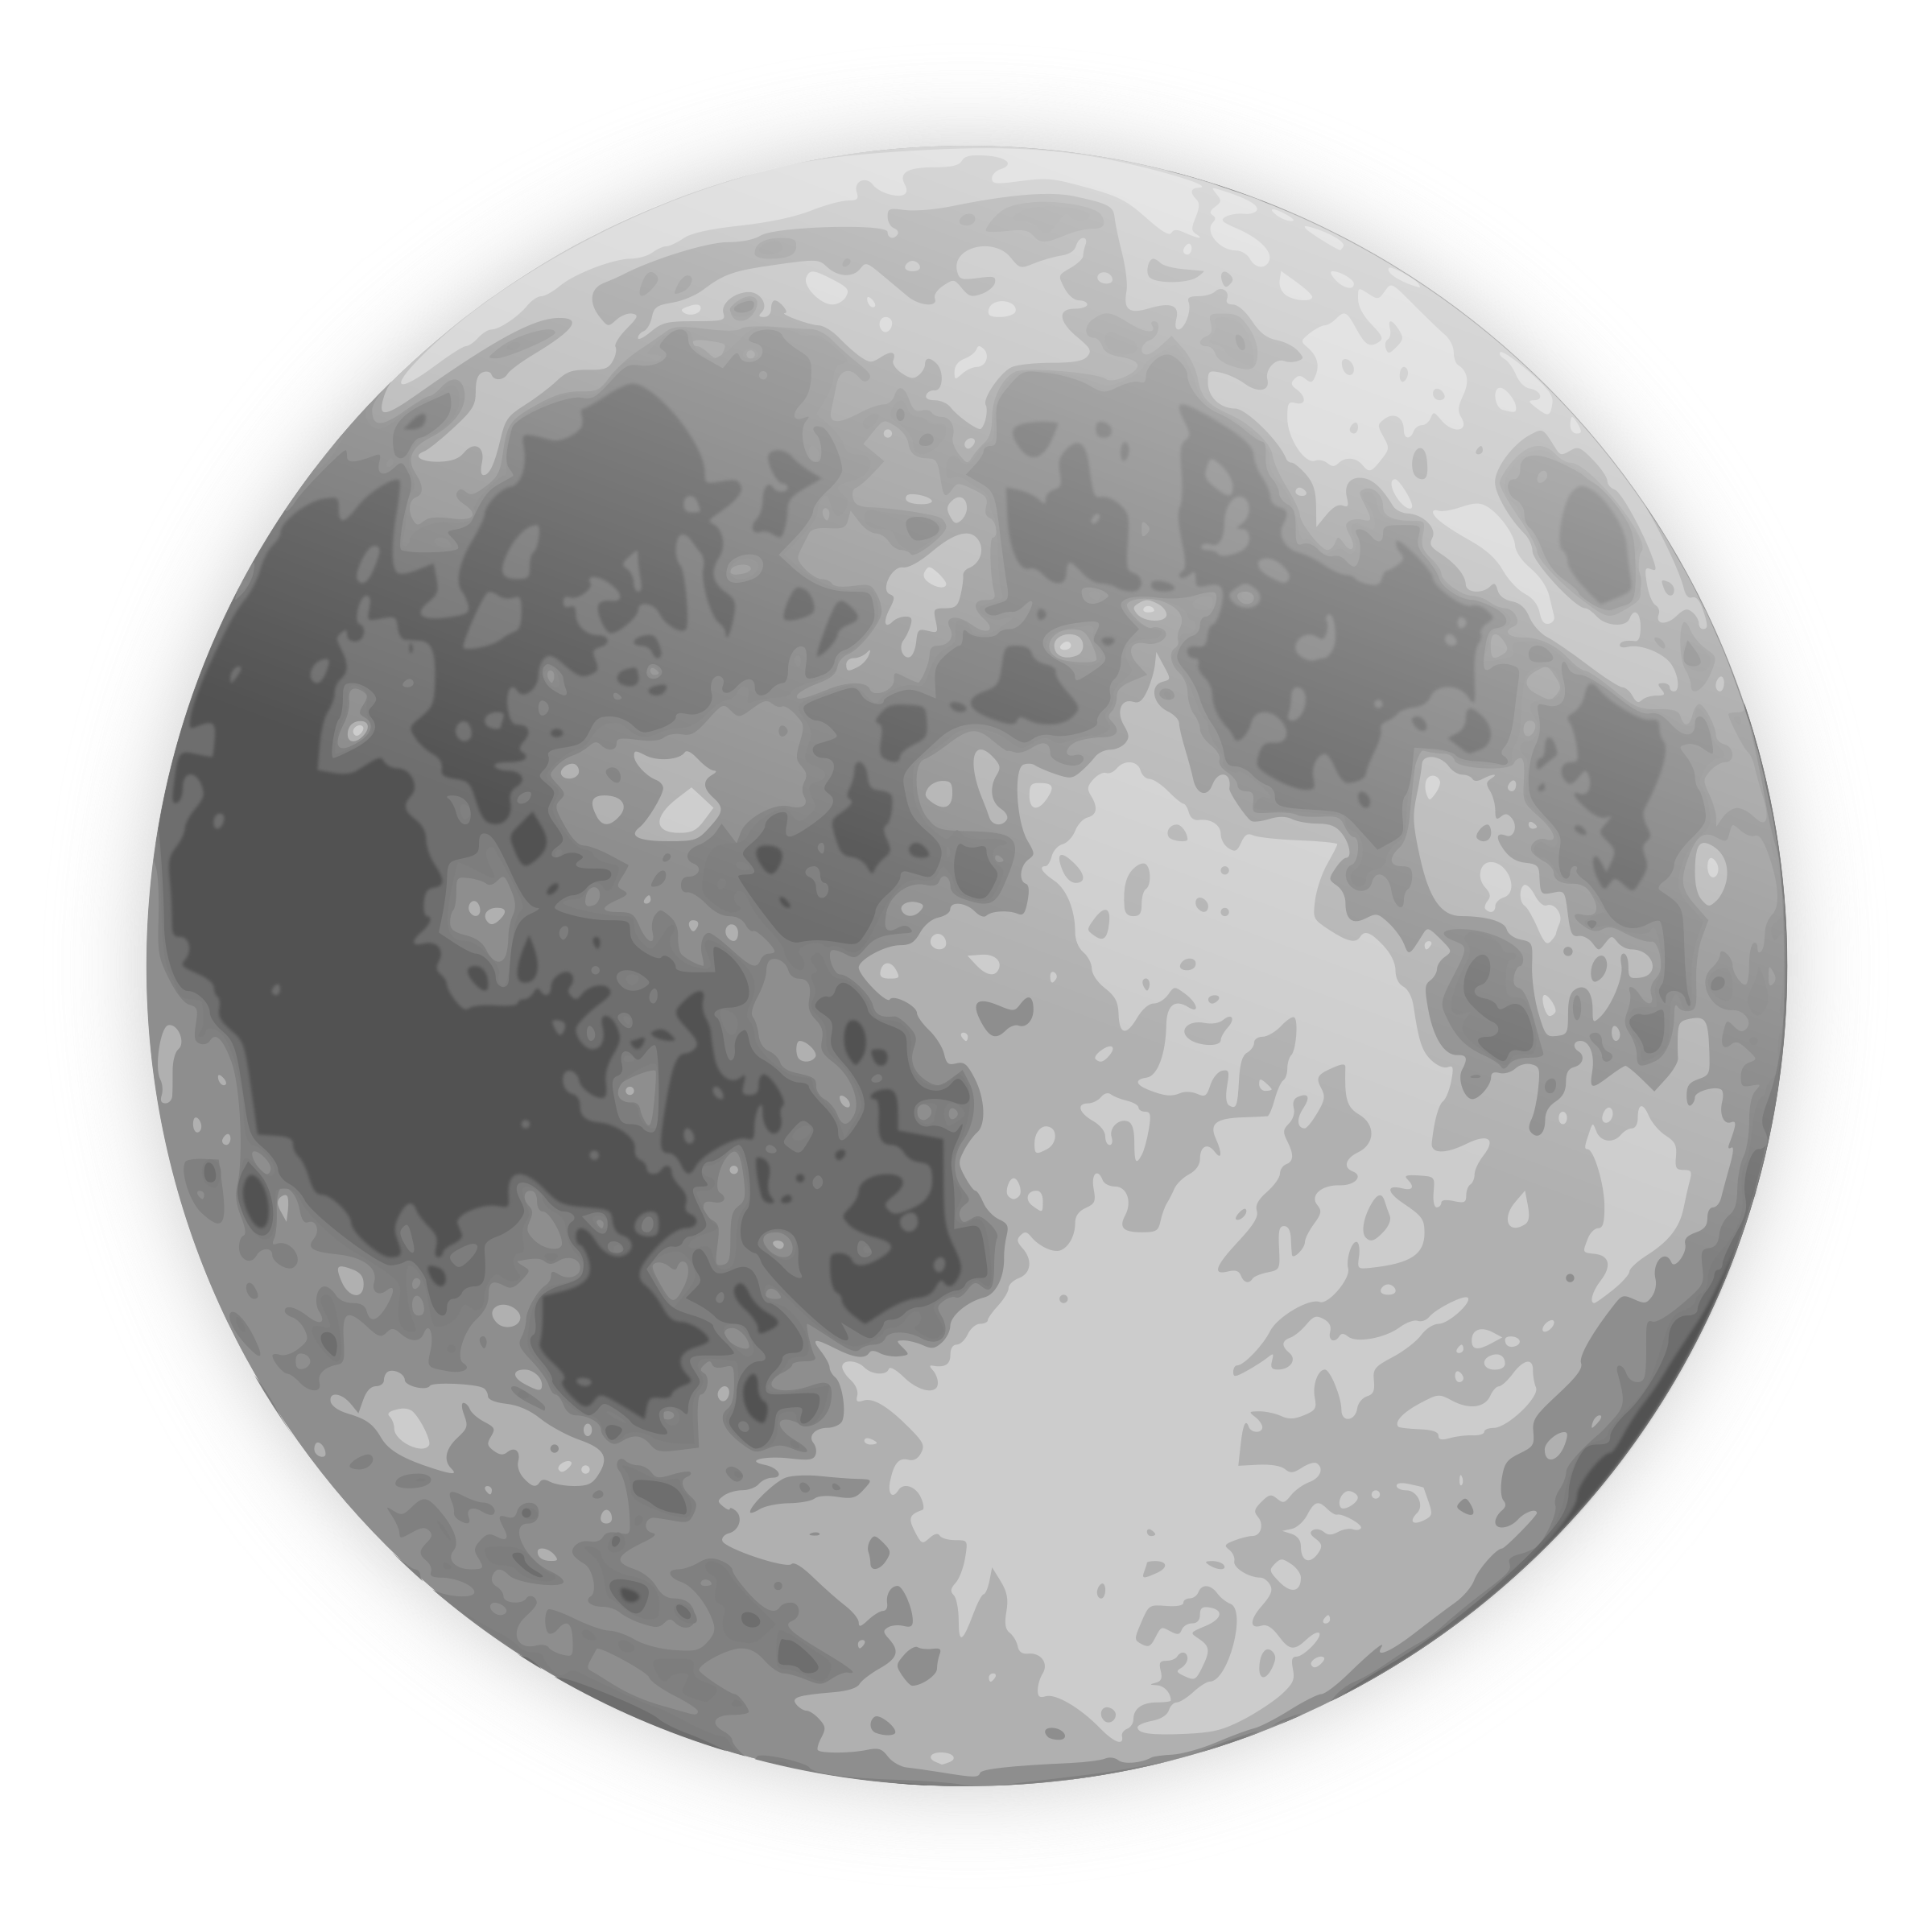 clipart of a full moon - photo #11